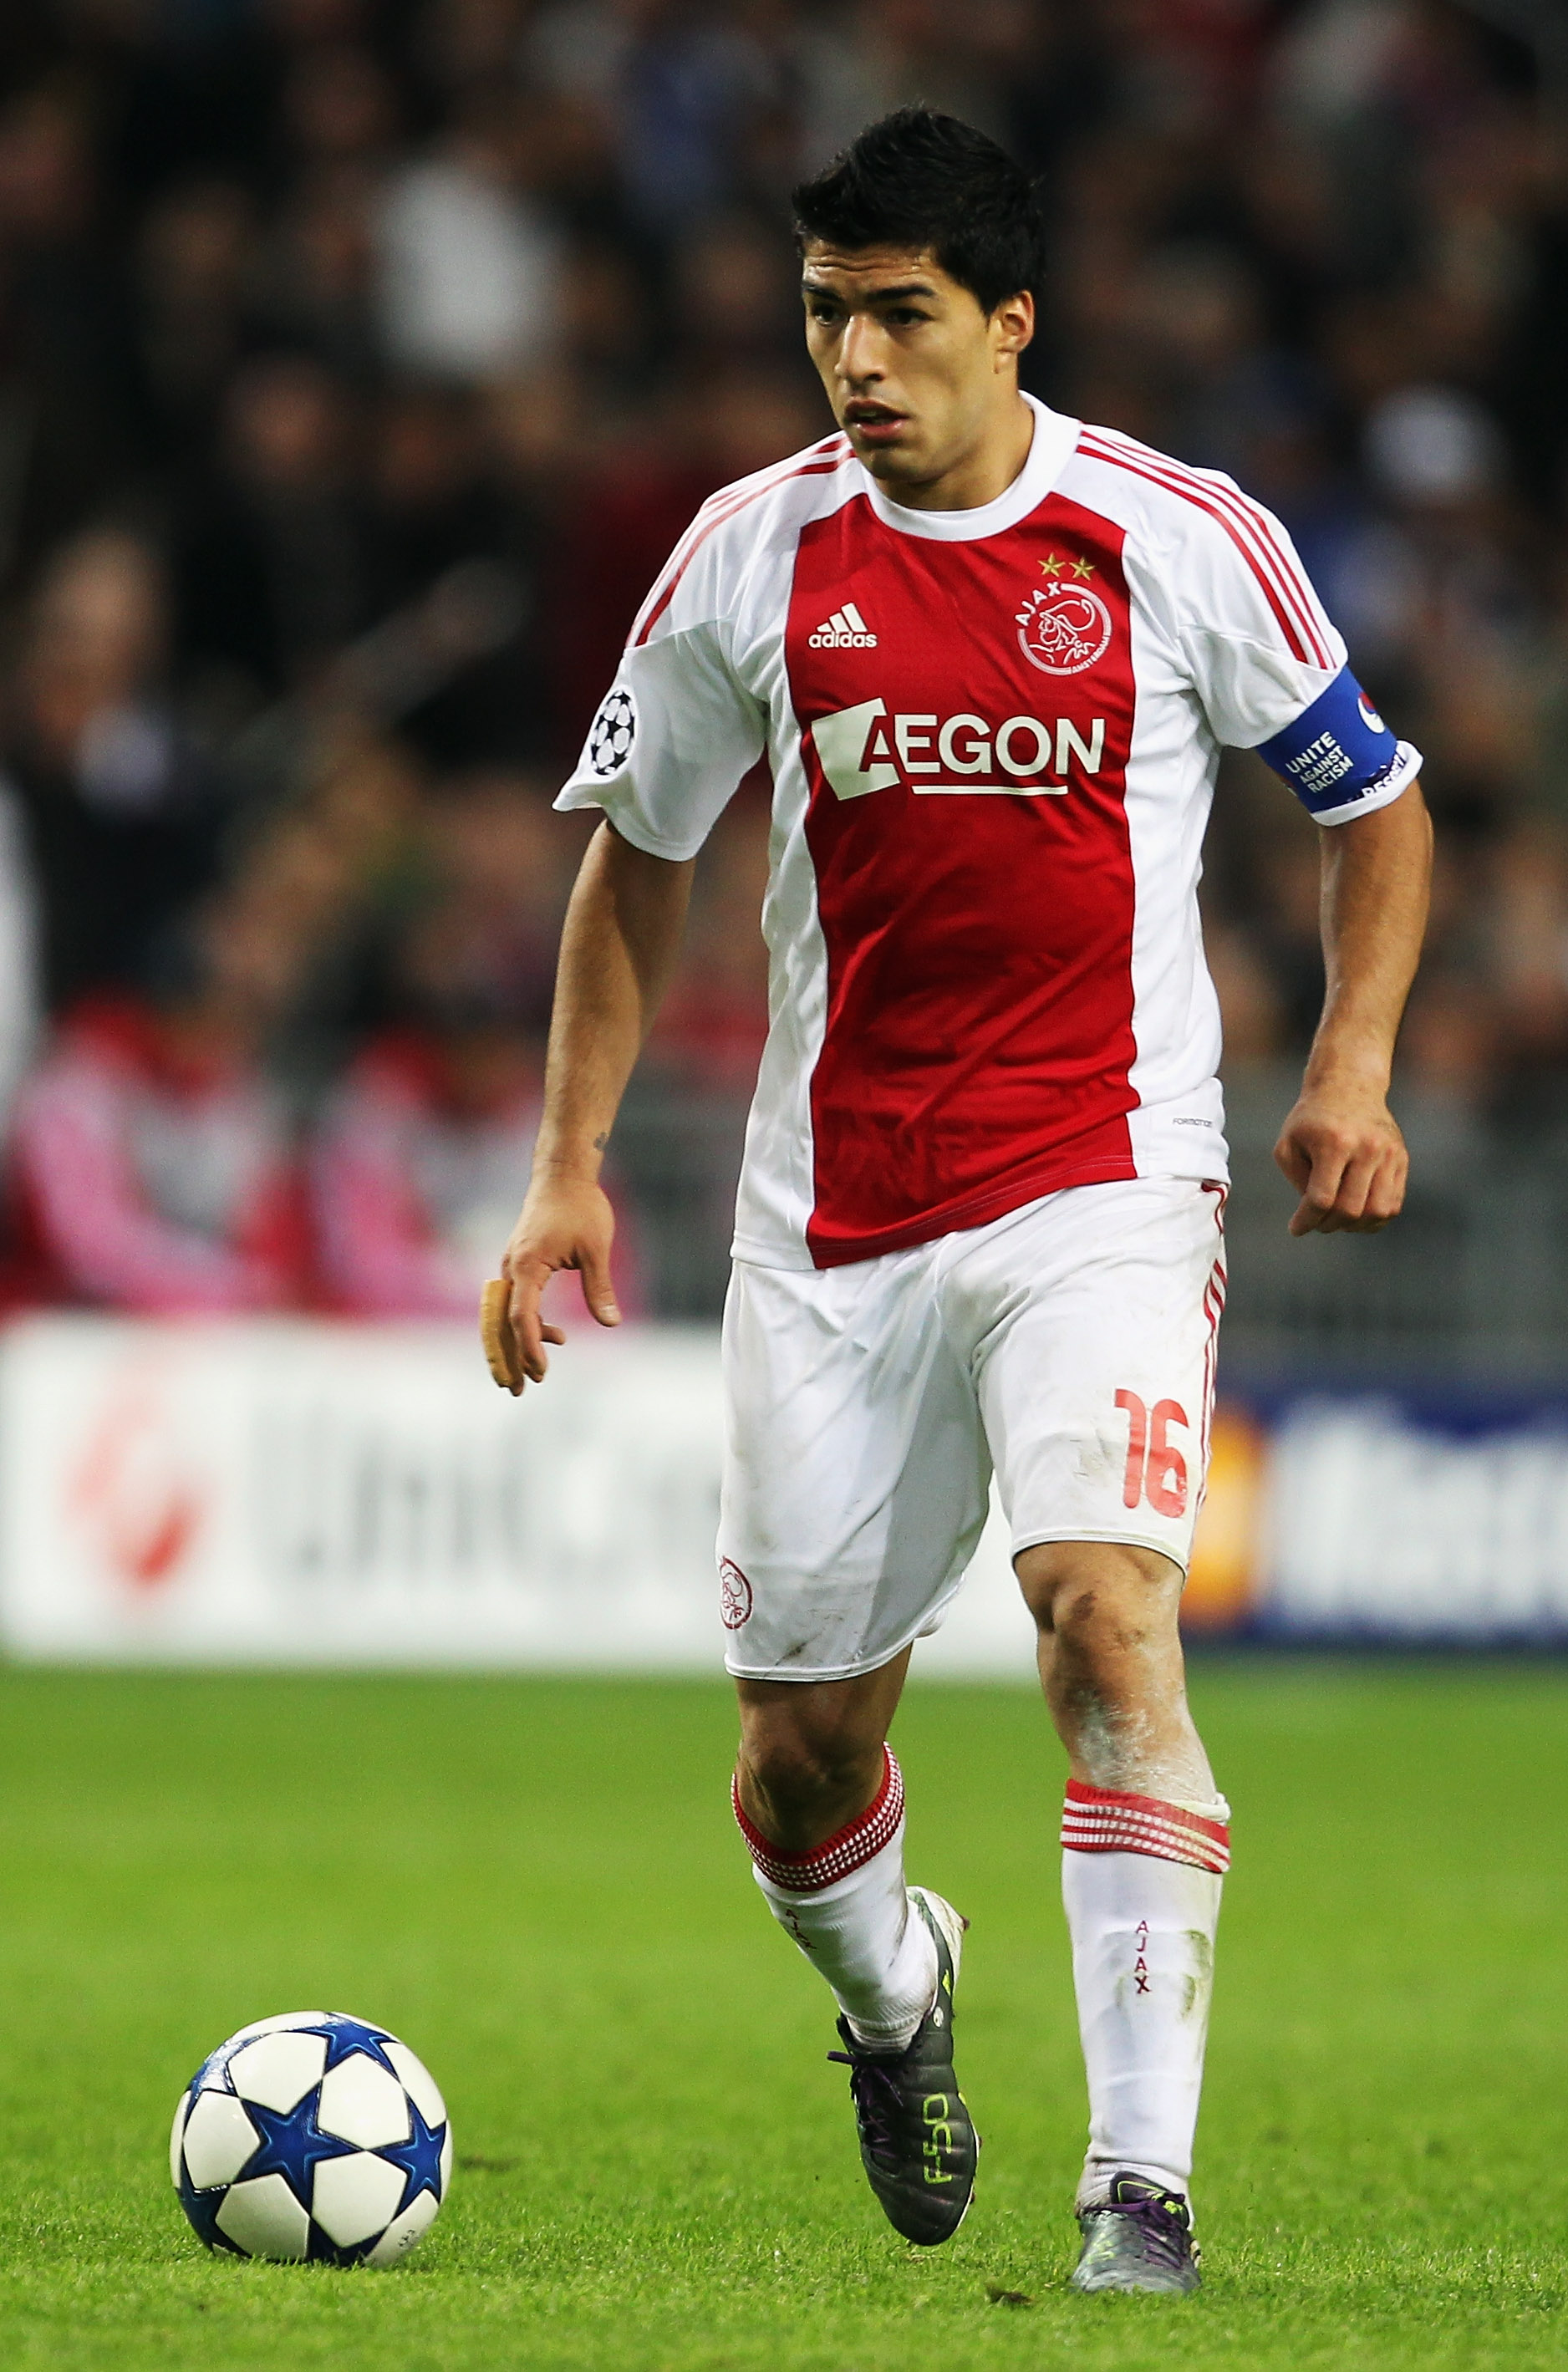 AMSTERDAM, NETHERLANDS - OCTOBER 19:  Luis Suarez of AFC Ajax in action during the UEFA Champions League Group G match between AFC Ajax and AJ Auxerre at the Amsterdam ArenA on October 19, 2010 in Amsterdam, Netherlands.  (Photo by Bryn Lennon/Getty Image